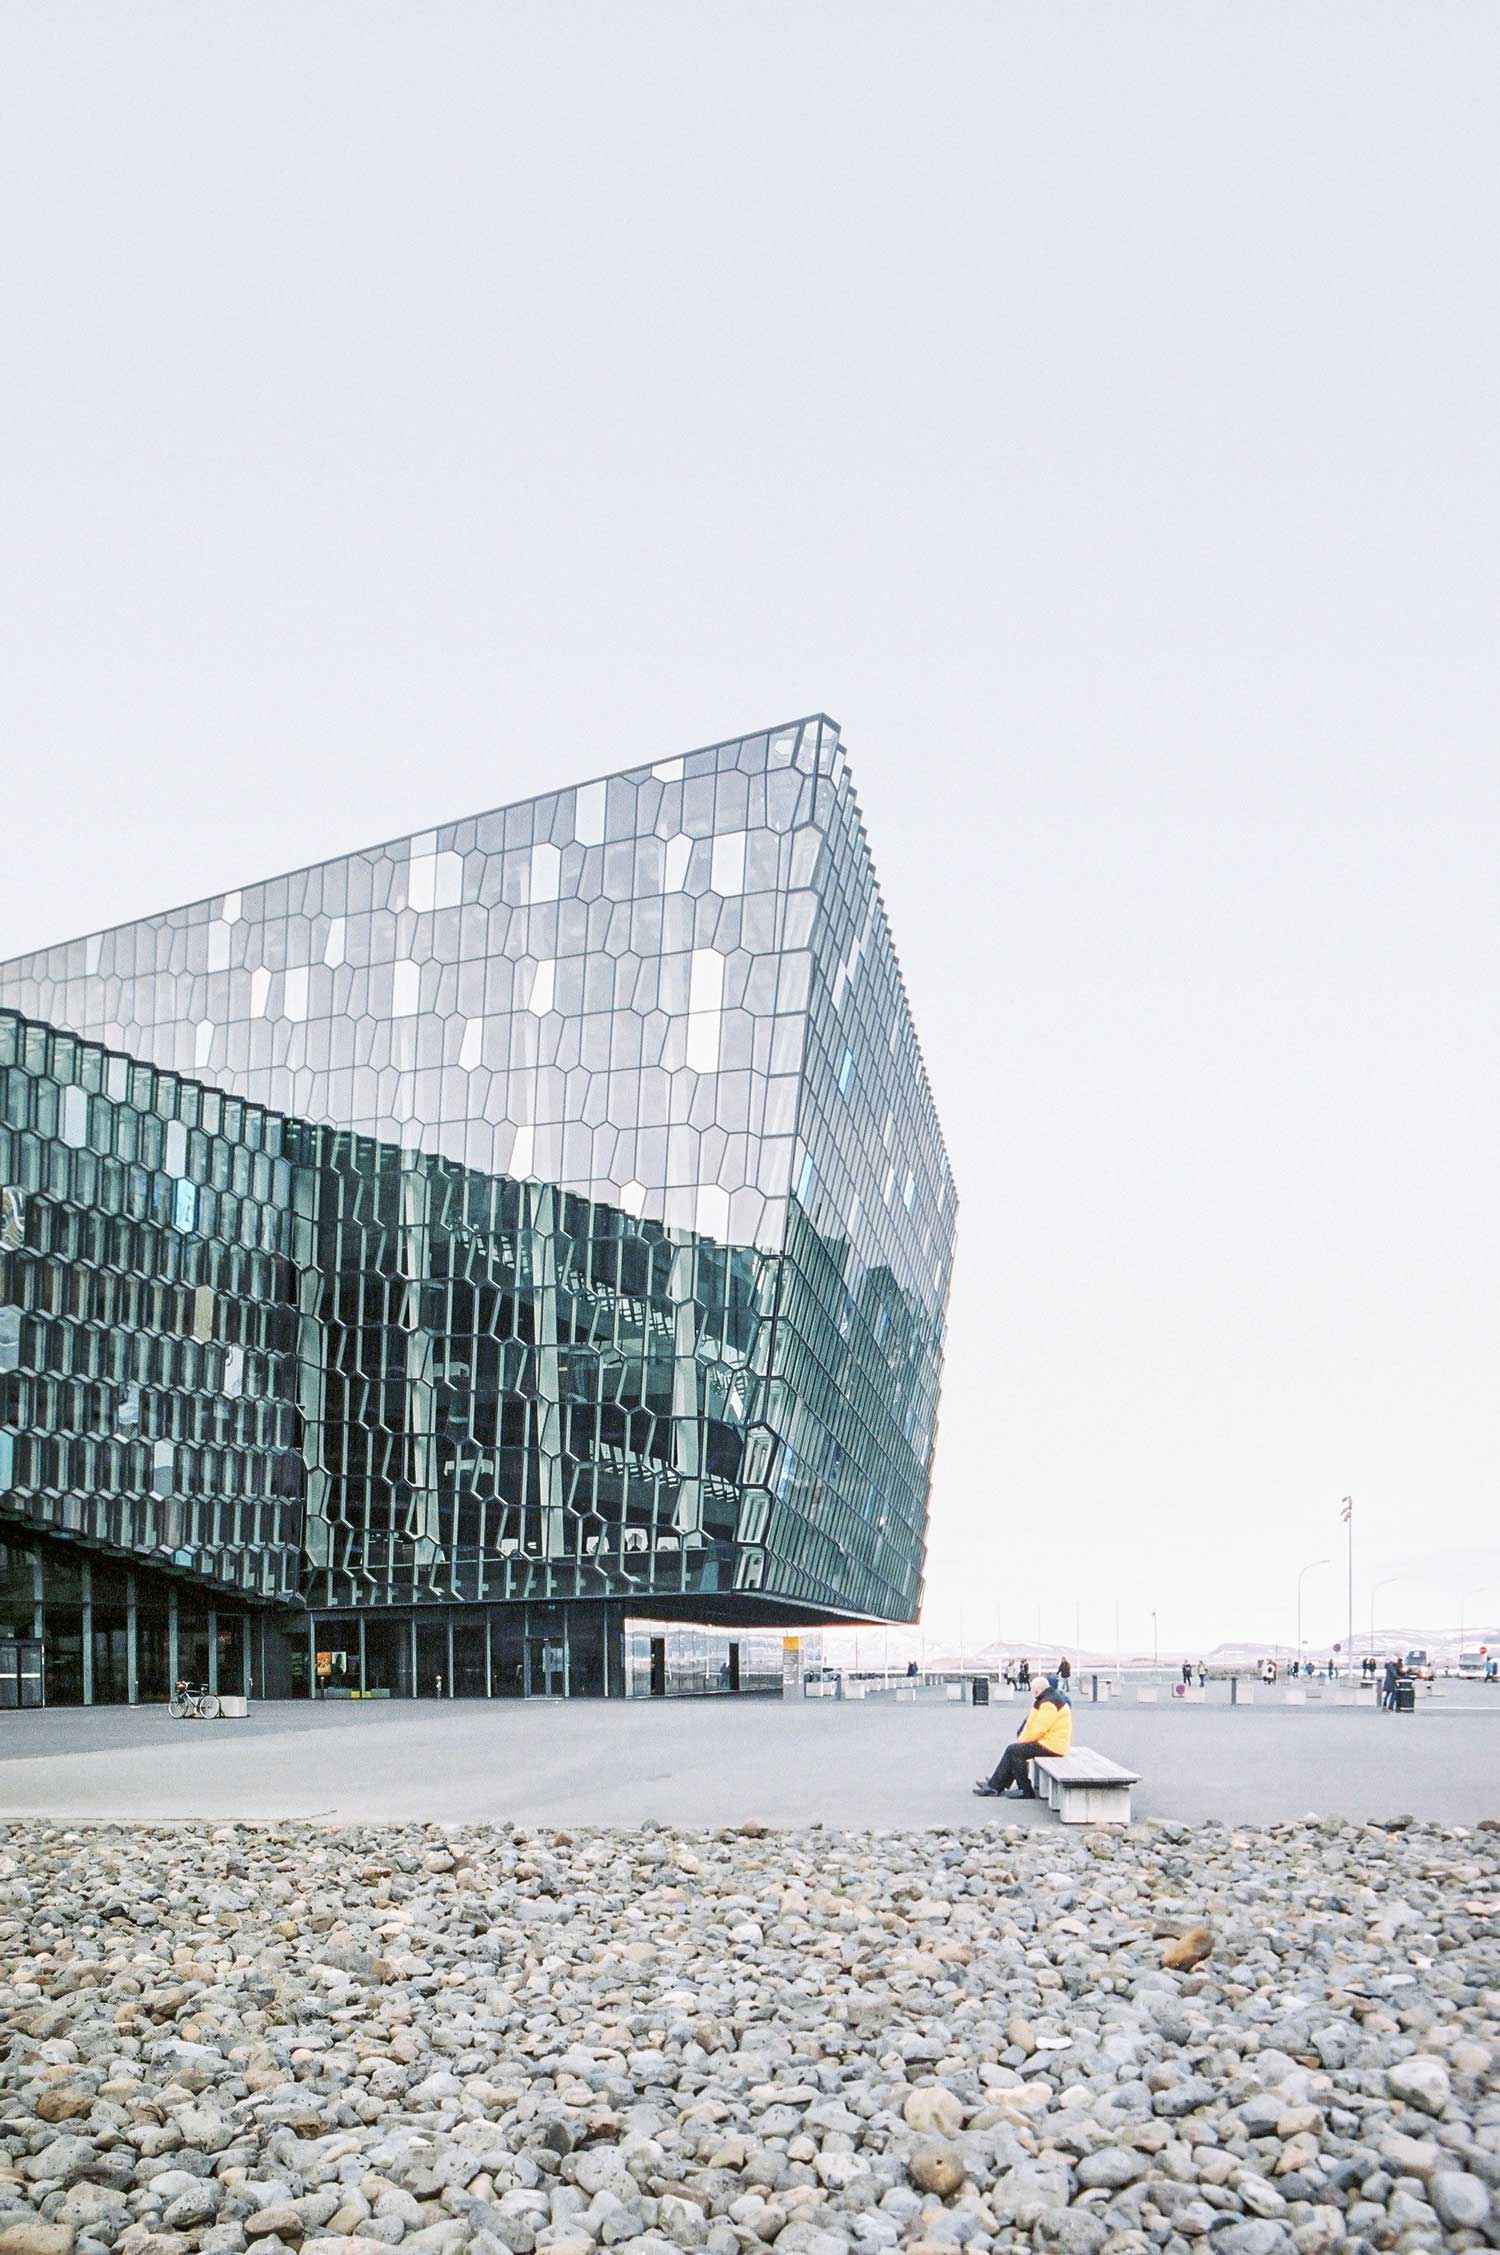 Harpa Concert Hall in Reykjavik, Iceland | CAPN Architectural Photography